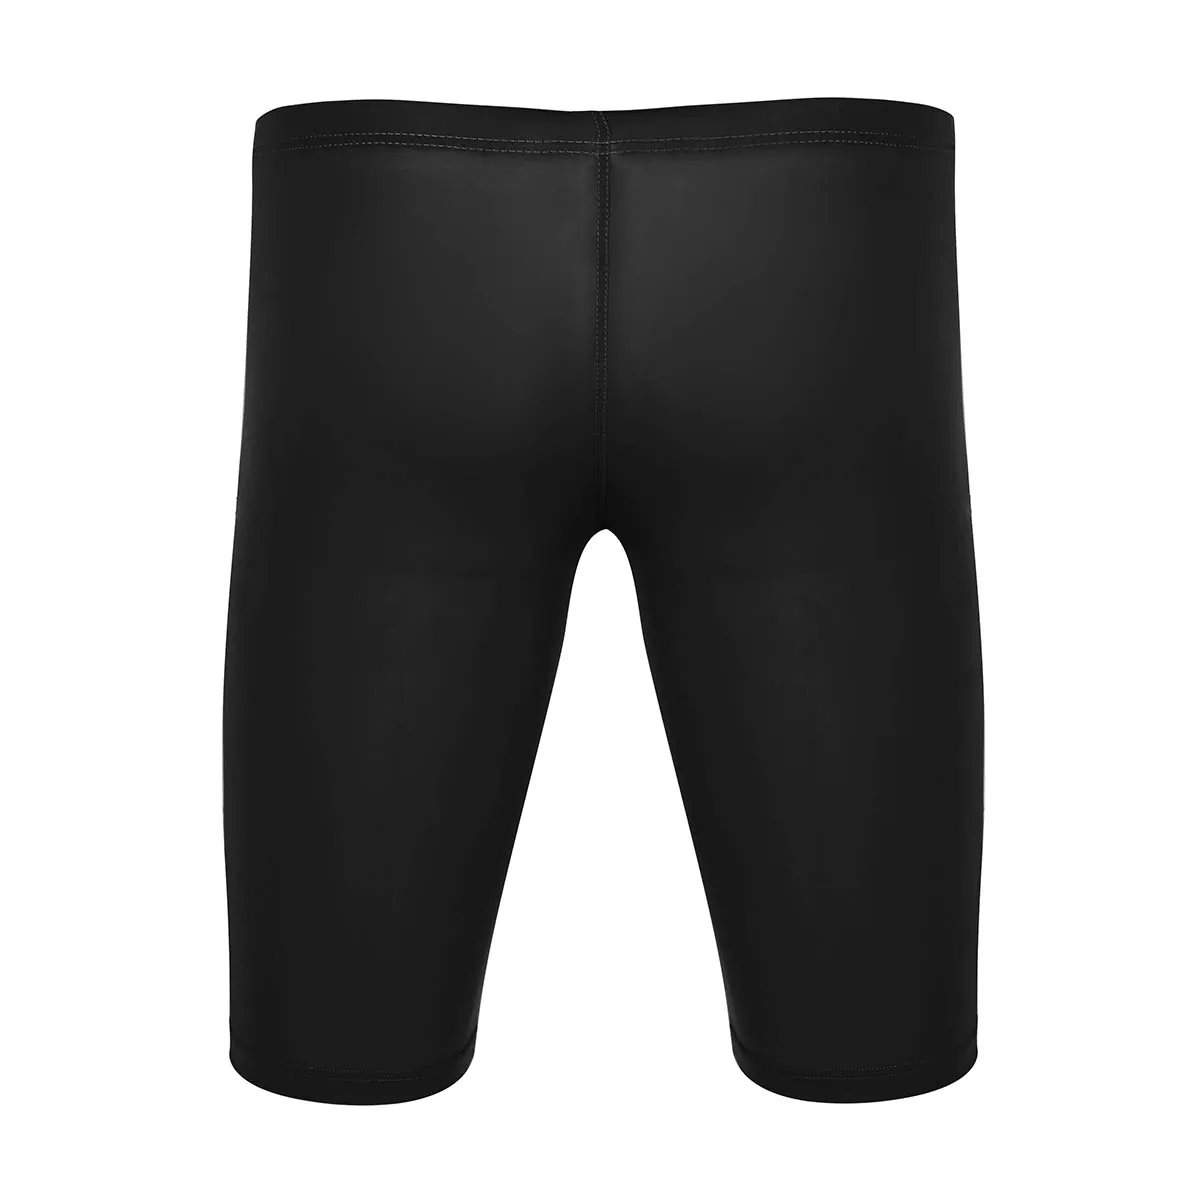 Mens Compression Base Layer Shorts Fashion Elastic Waistband Bulge Pouch Tight Shorts Quick Dry Sports Workout Gyms Short Pants black casual shorts